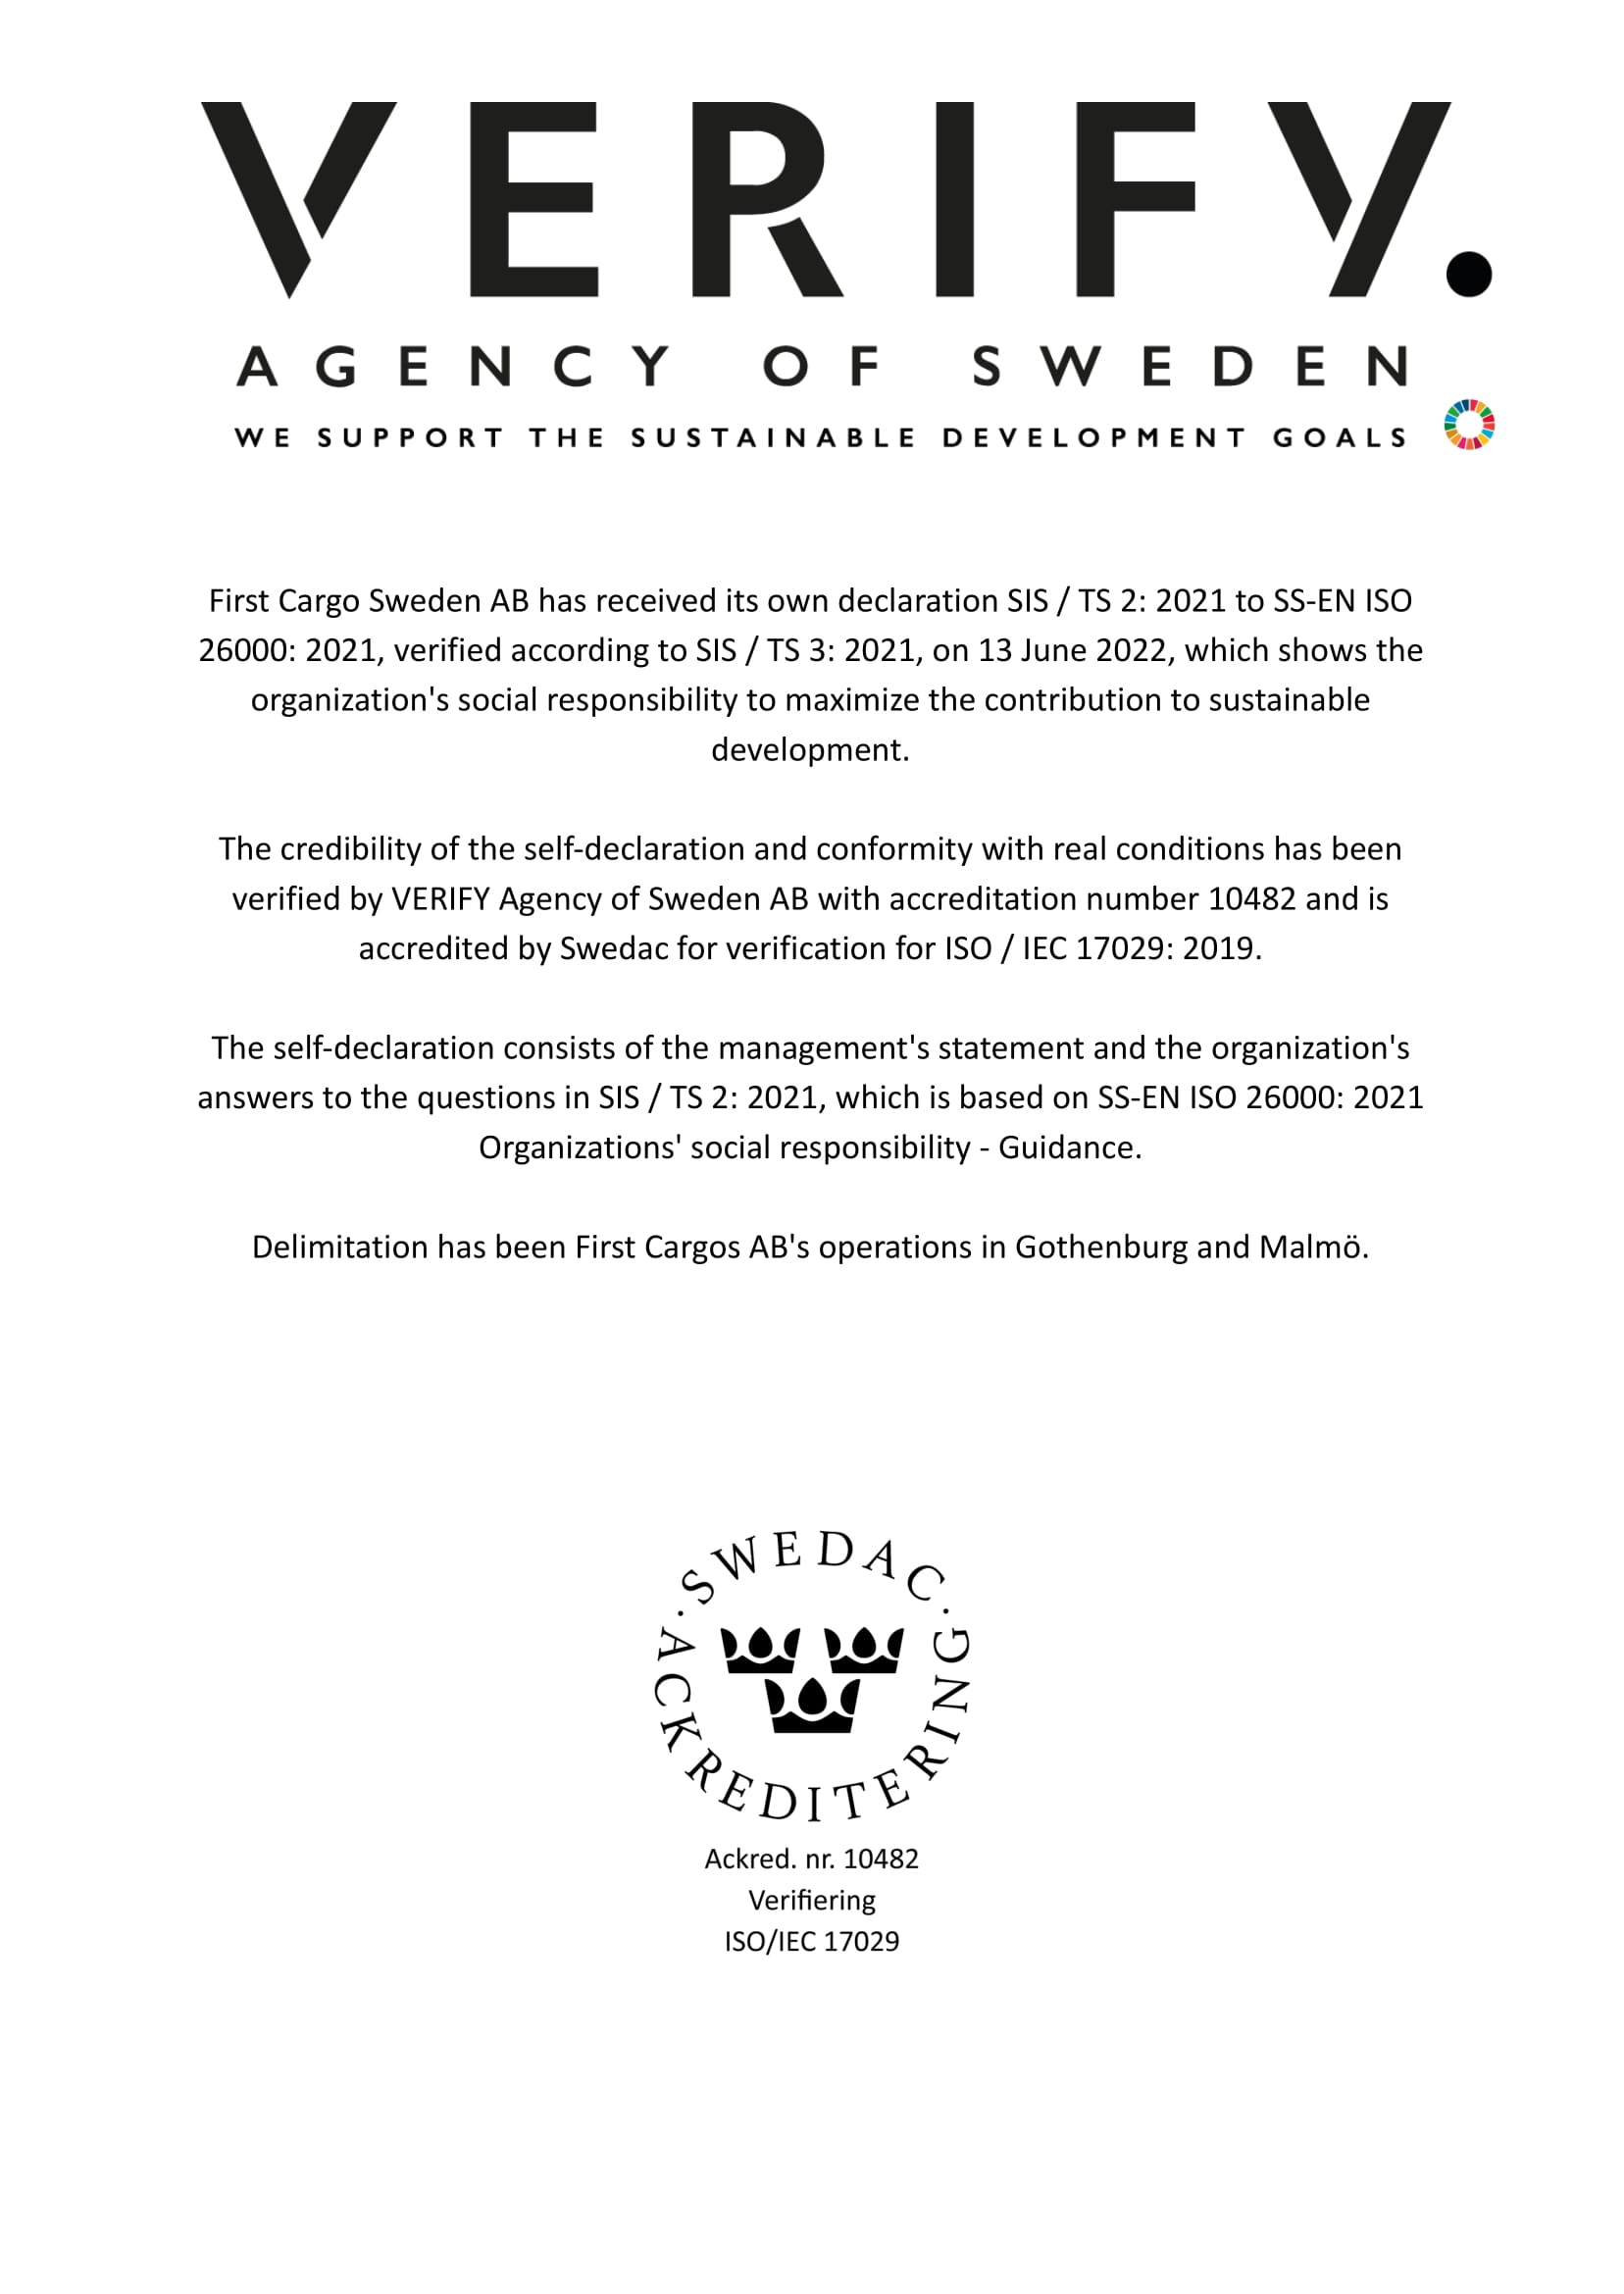 First Cargo Sweden AB has received its own declaration SIS / TS 2: 2021 to SS-EN ISO 26000: 2021,